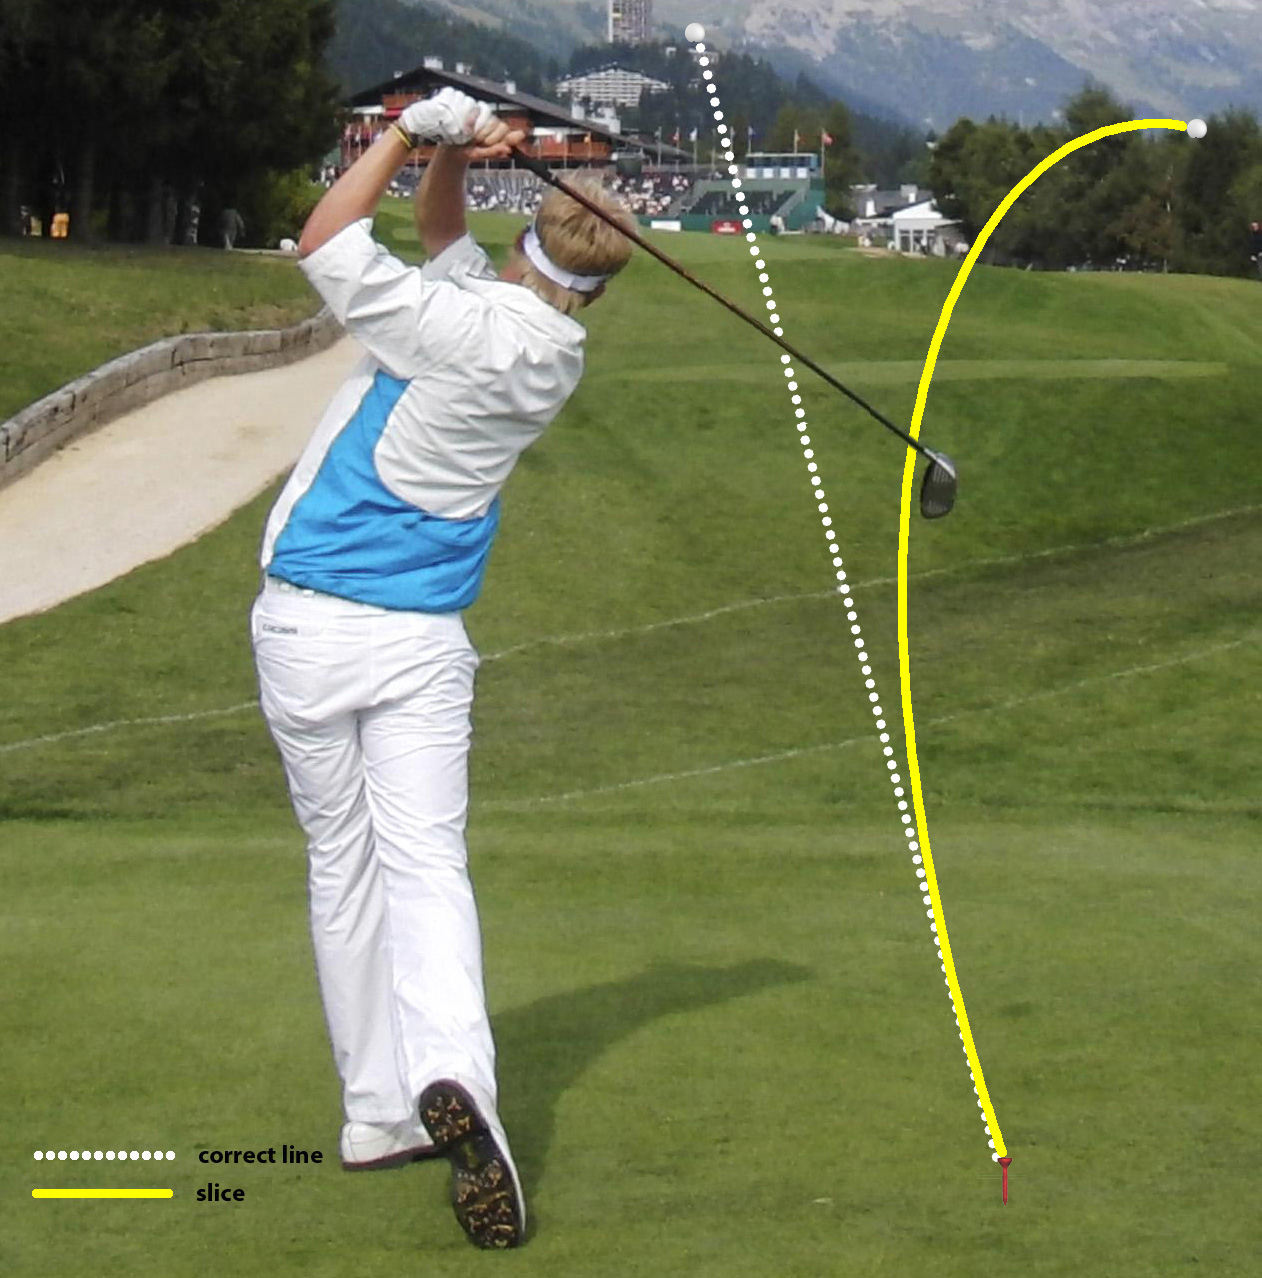 Golf swing tips - 1: How to cure a slice | GolfMagic